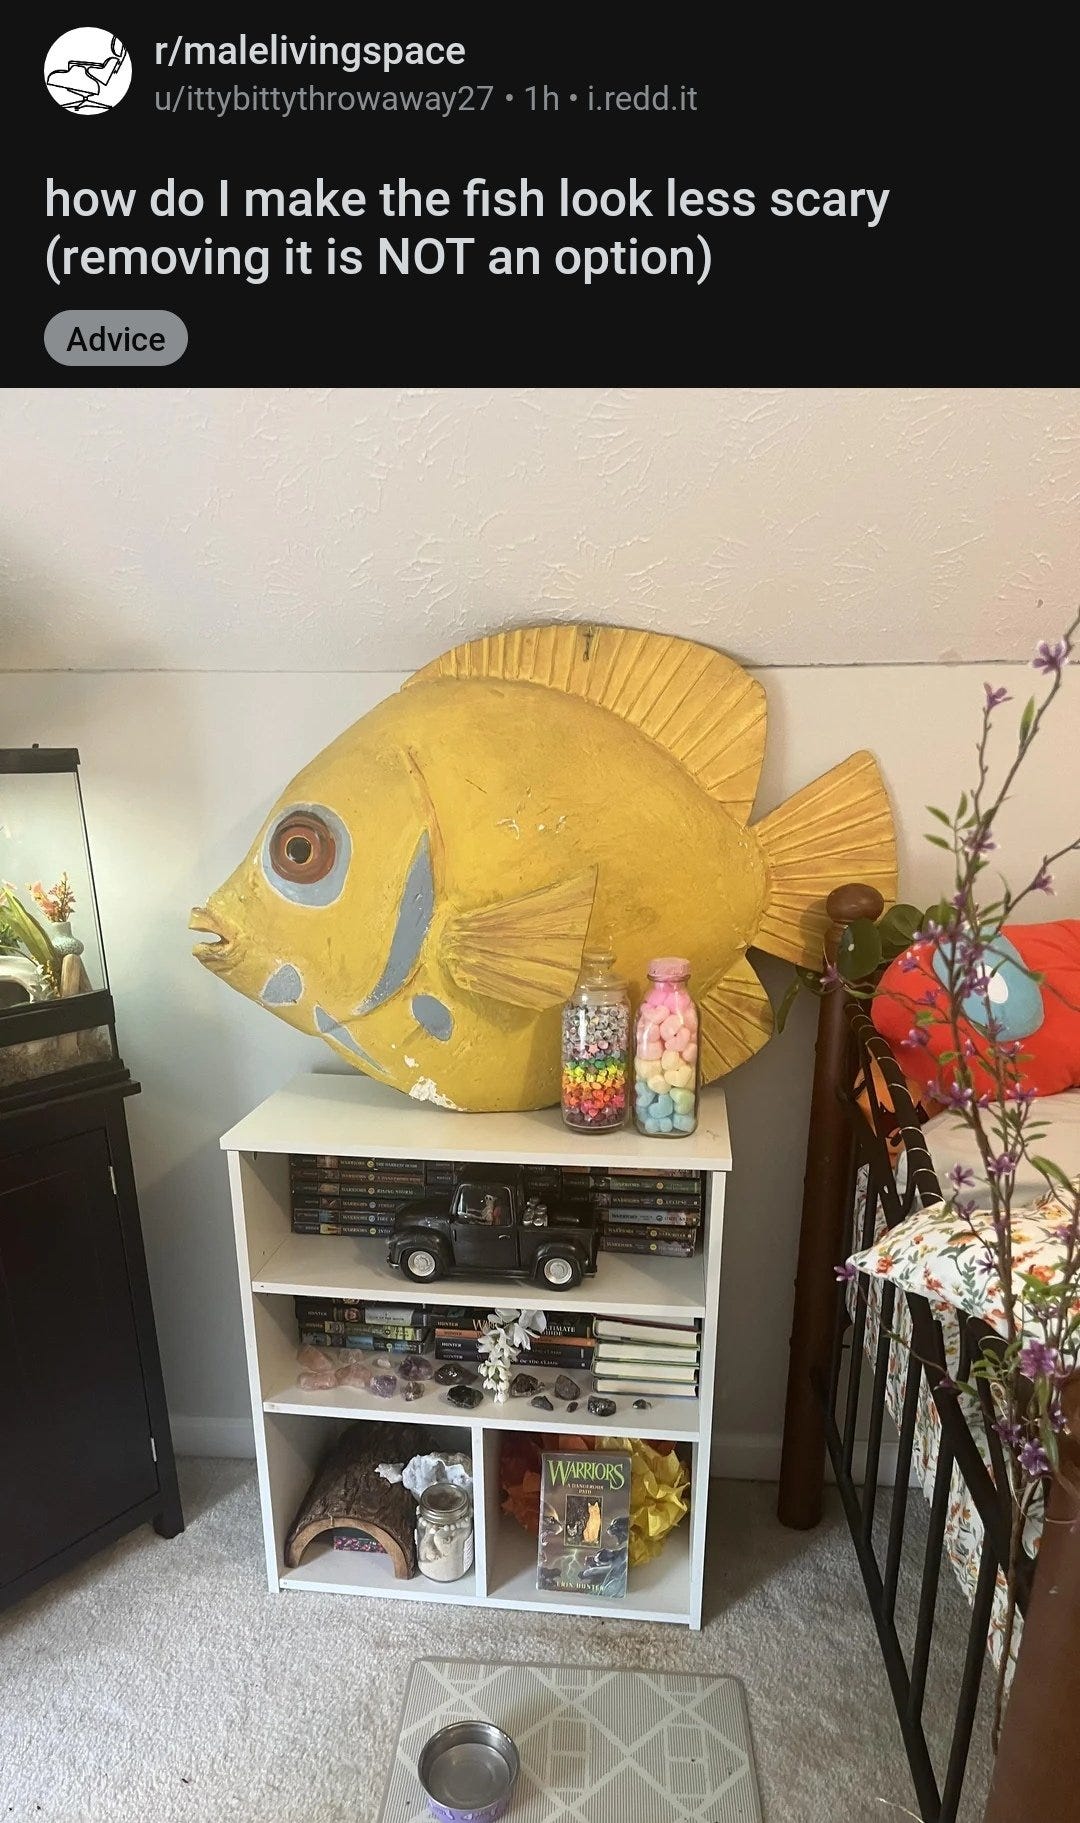 ID: a screenshot of a reddit from male living space about making a large fish less scary 